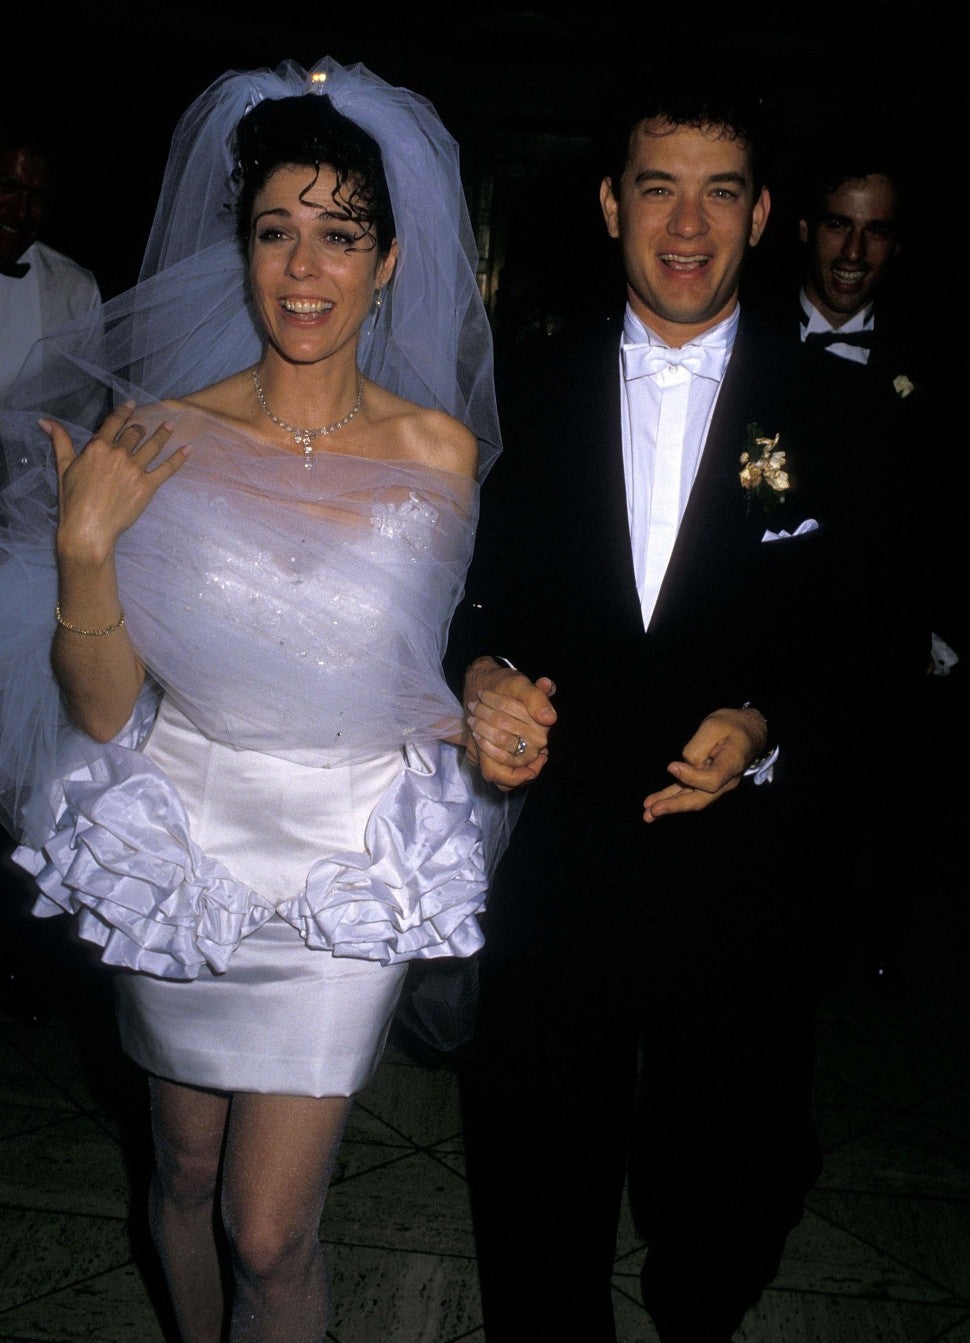 Rita Wilson and Tom Hanks attend their wedding reception on April 30, 1988 at Rex's in Los Angeles, California